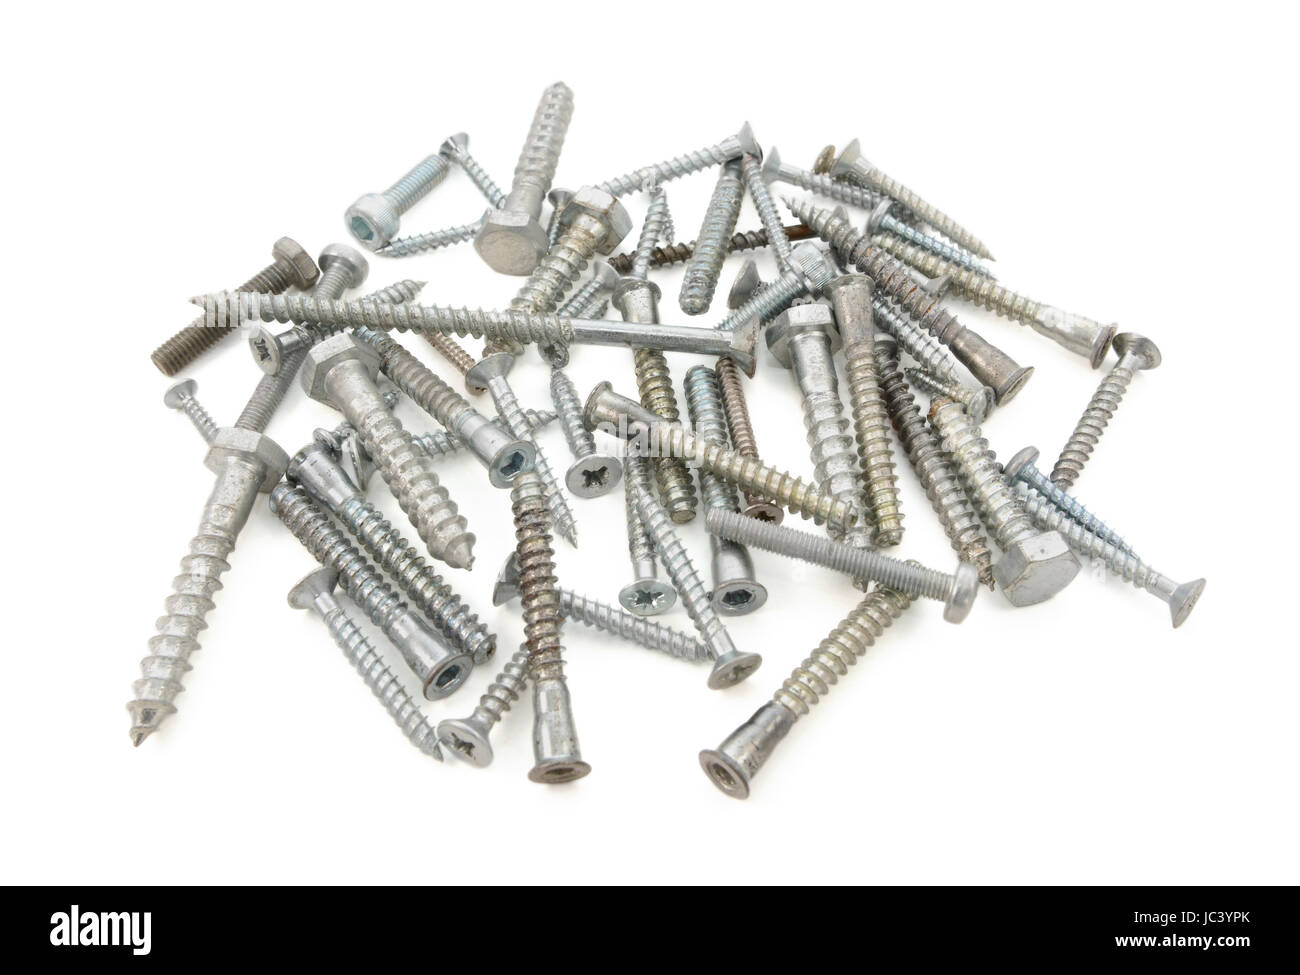 Mixed pile of screws and bolts of different sizes and kinds, isolated on a white background Stock Photo